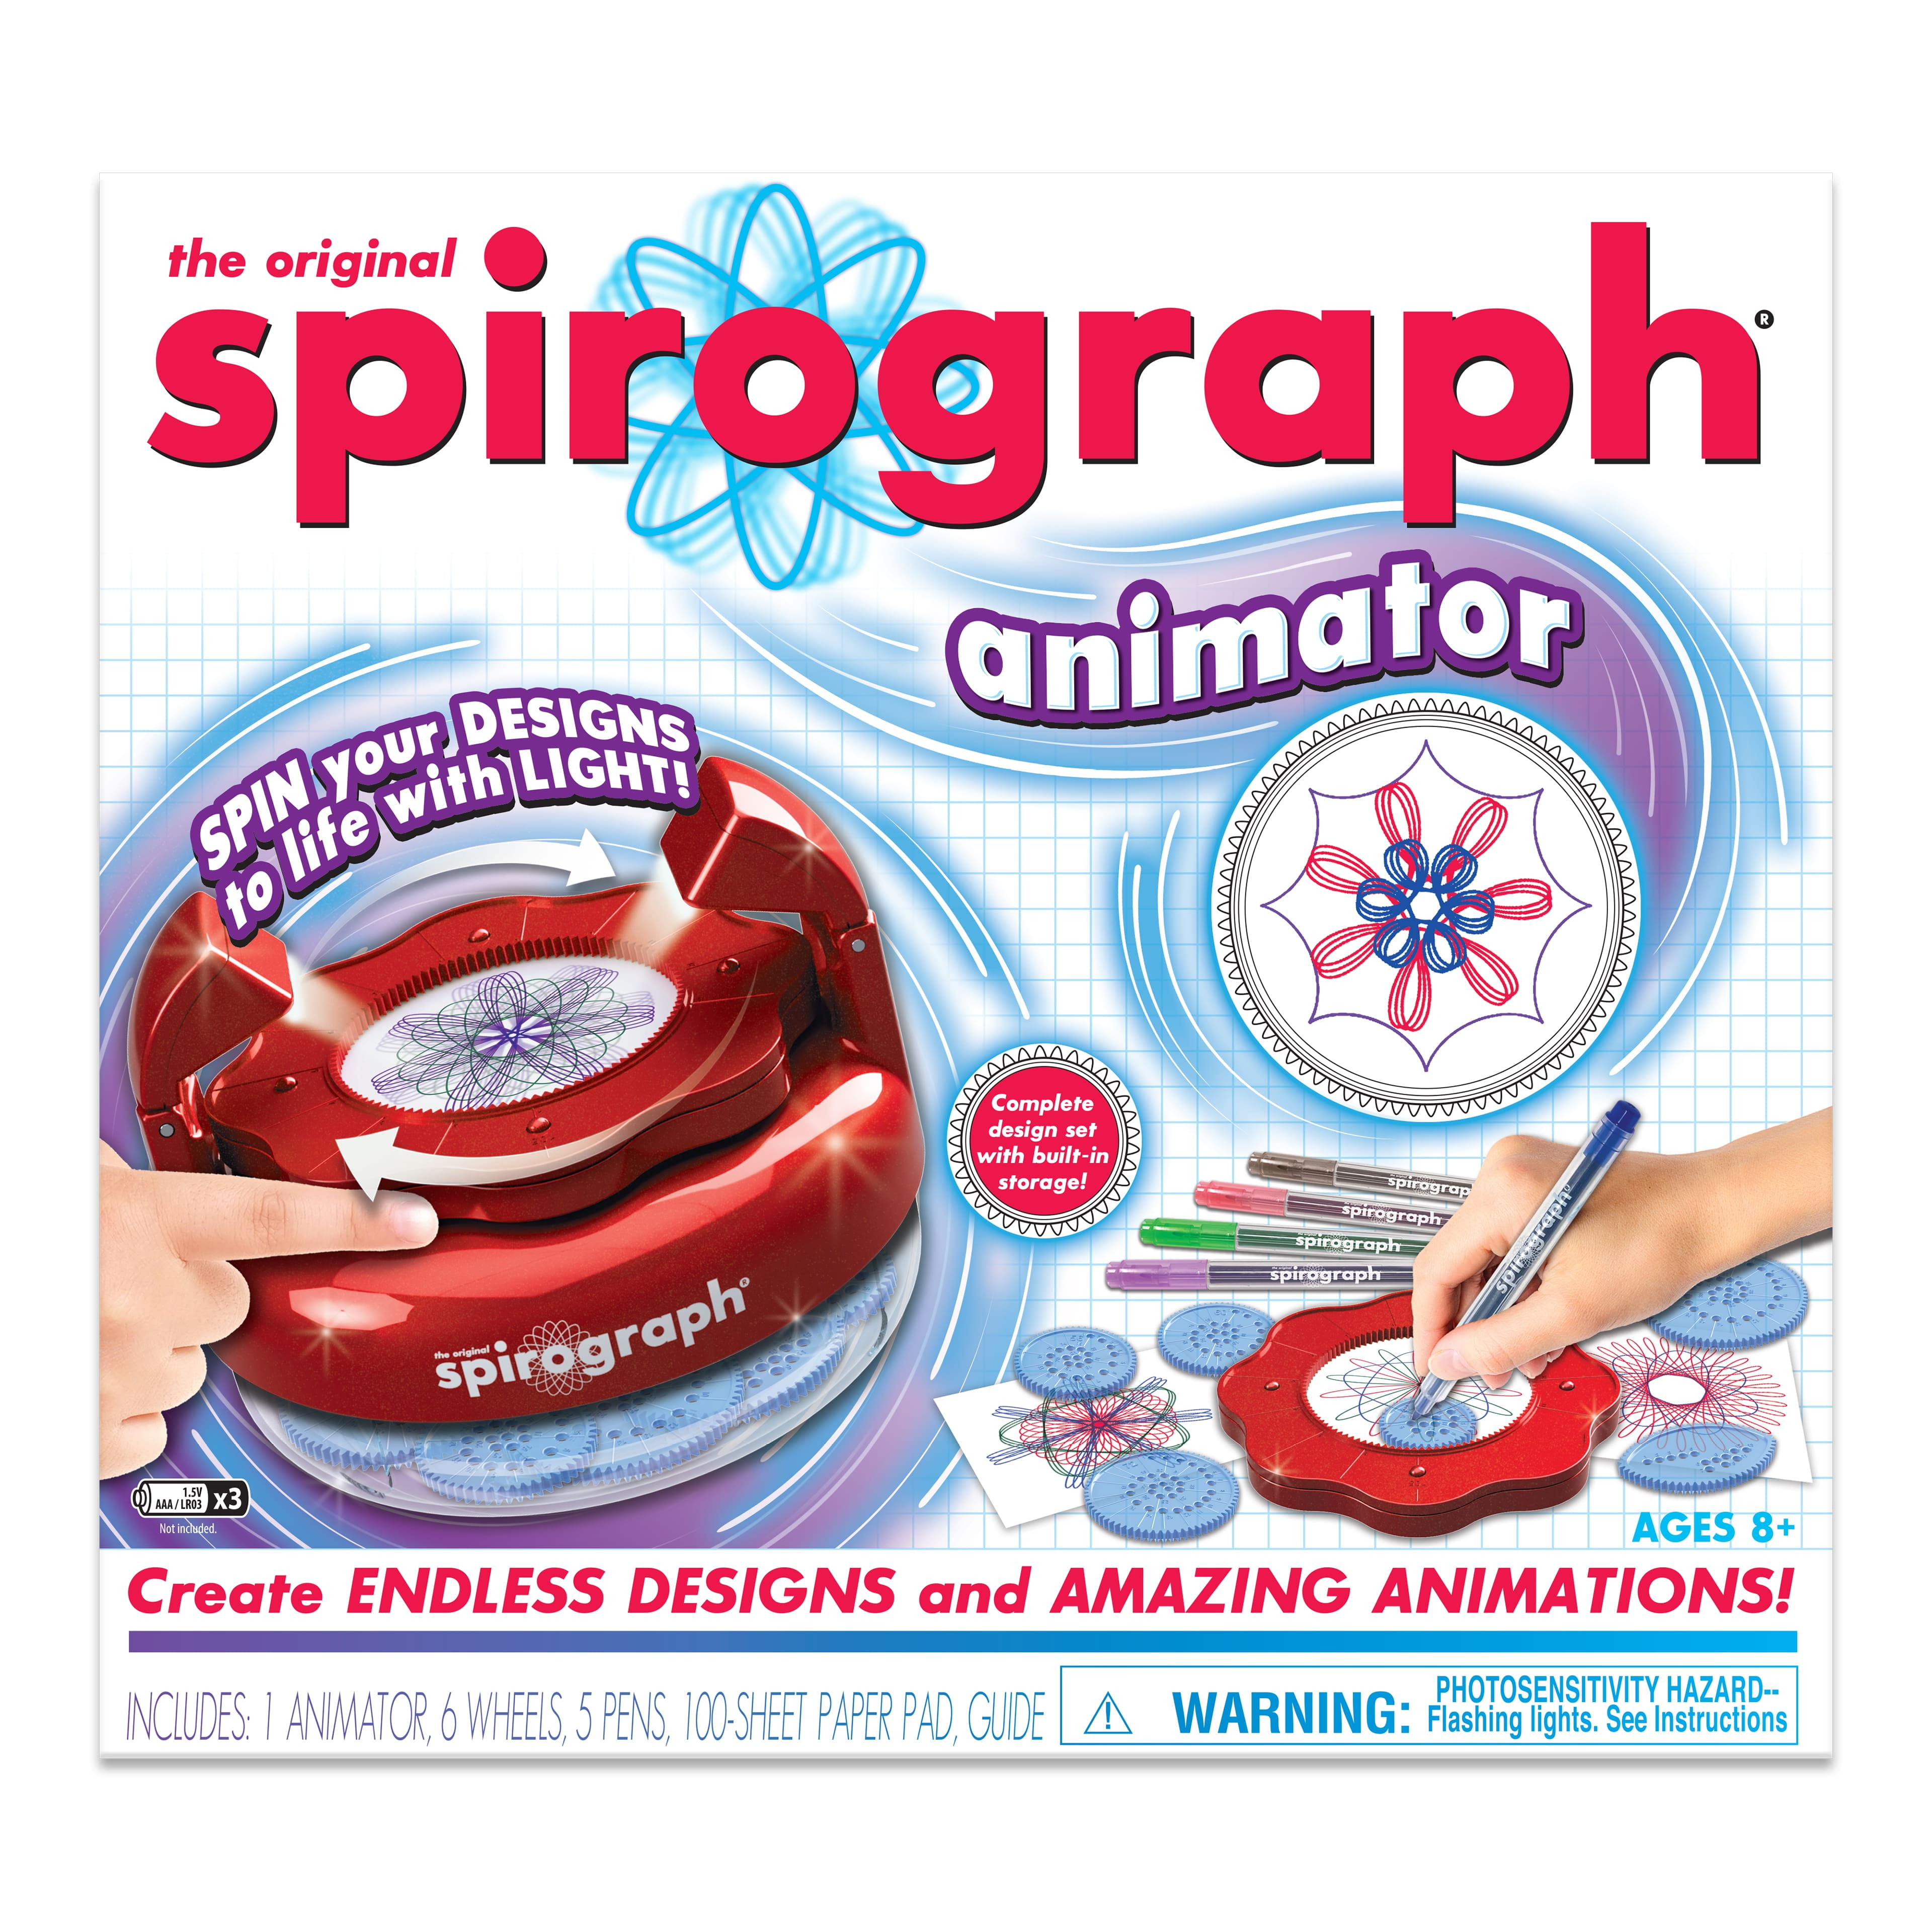 Spirographs: A great art activity for kids and adults  Spirograph,  Spirograph design, Art activities for kids